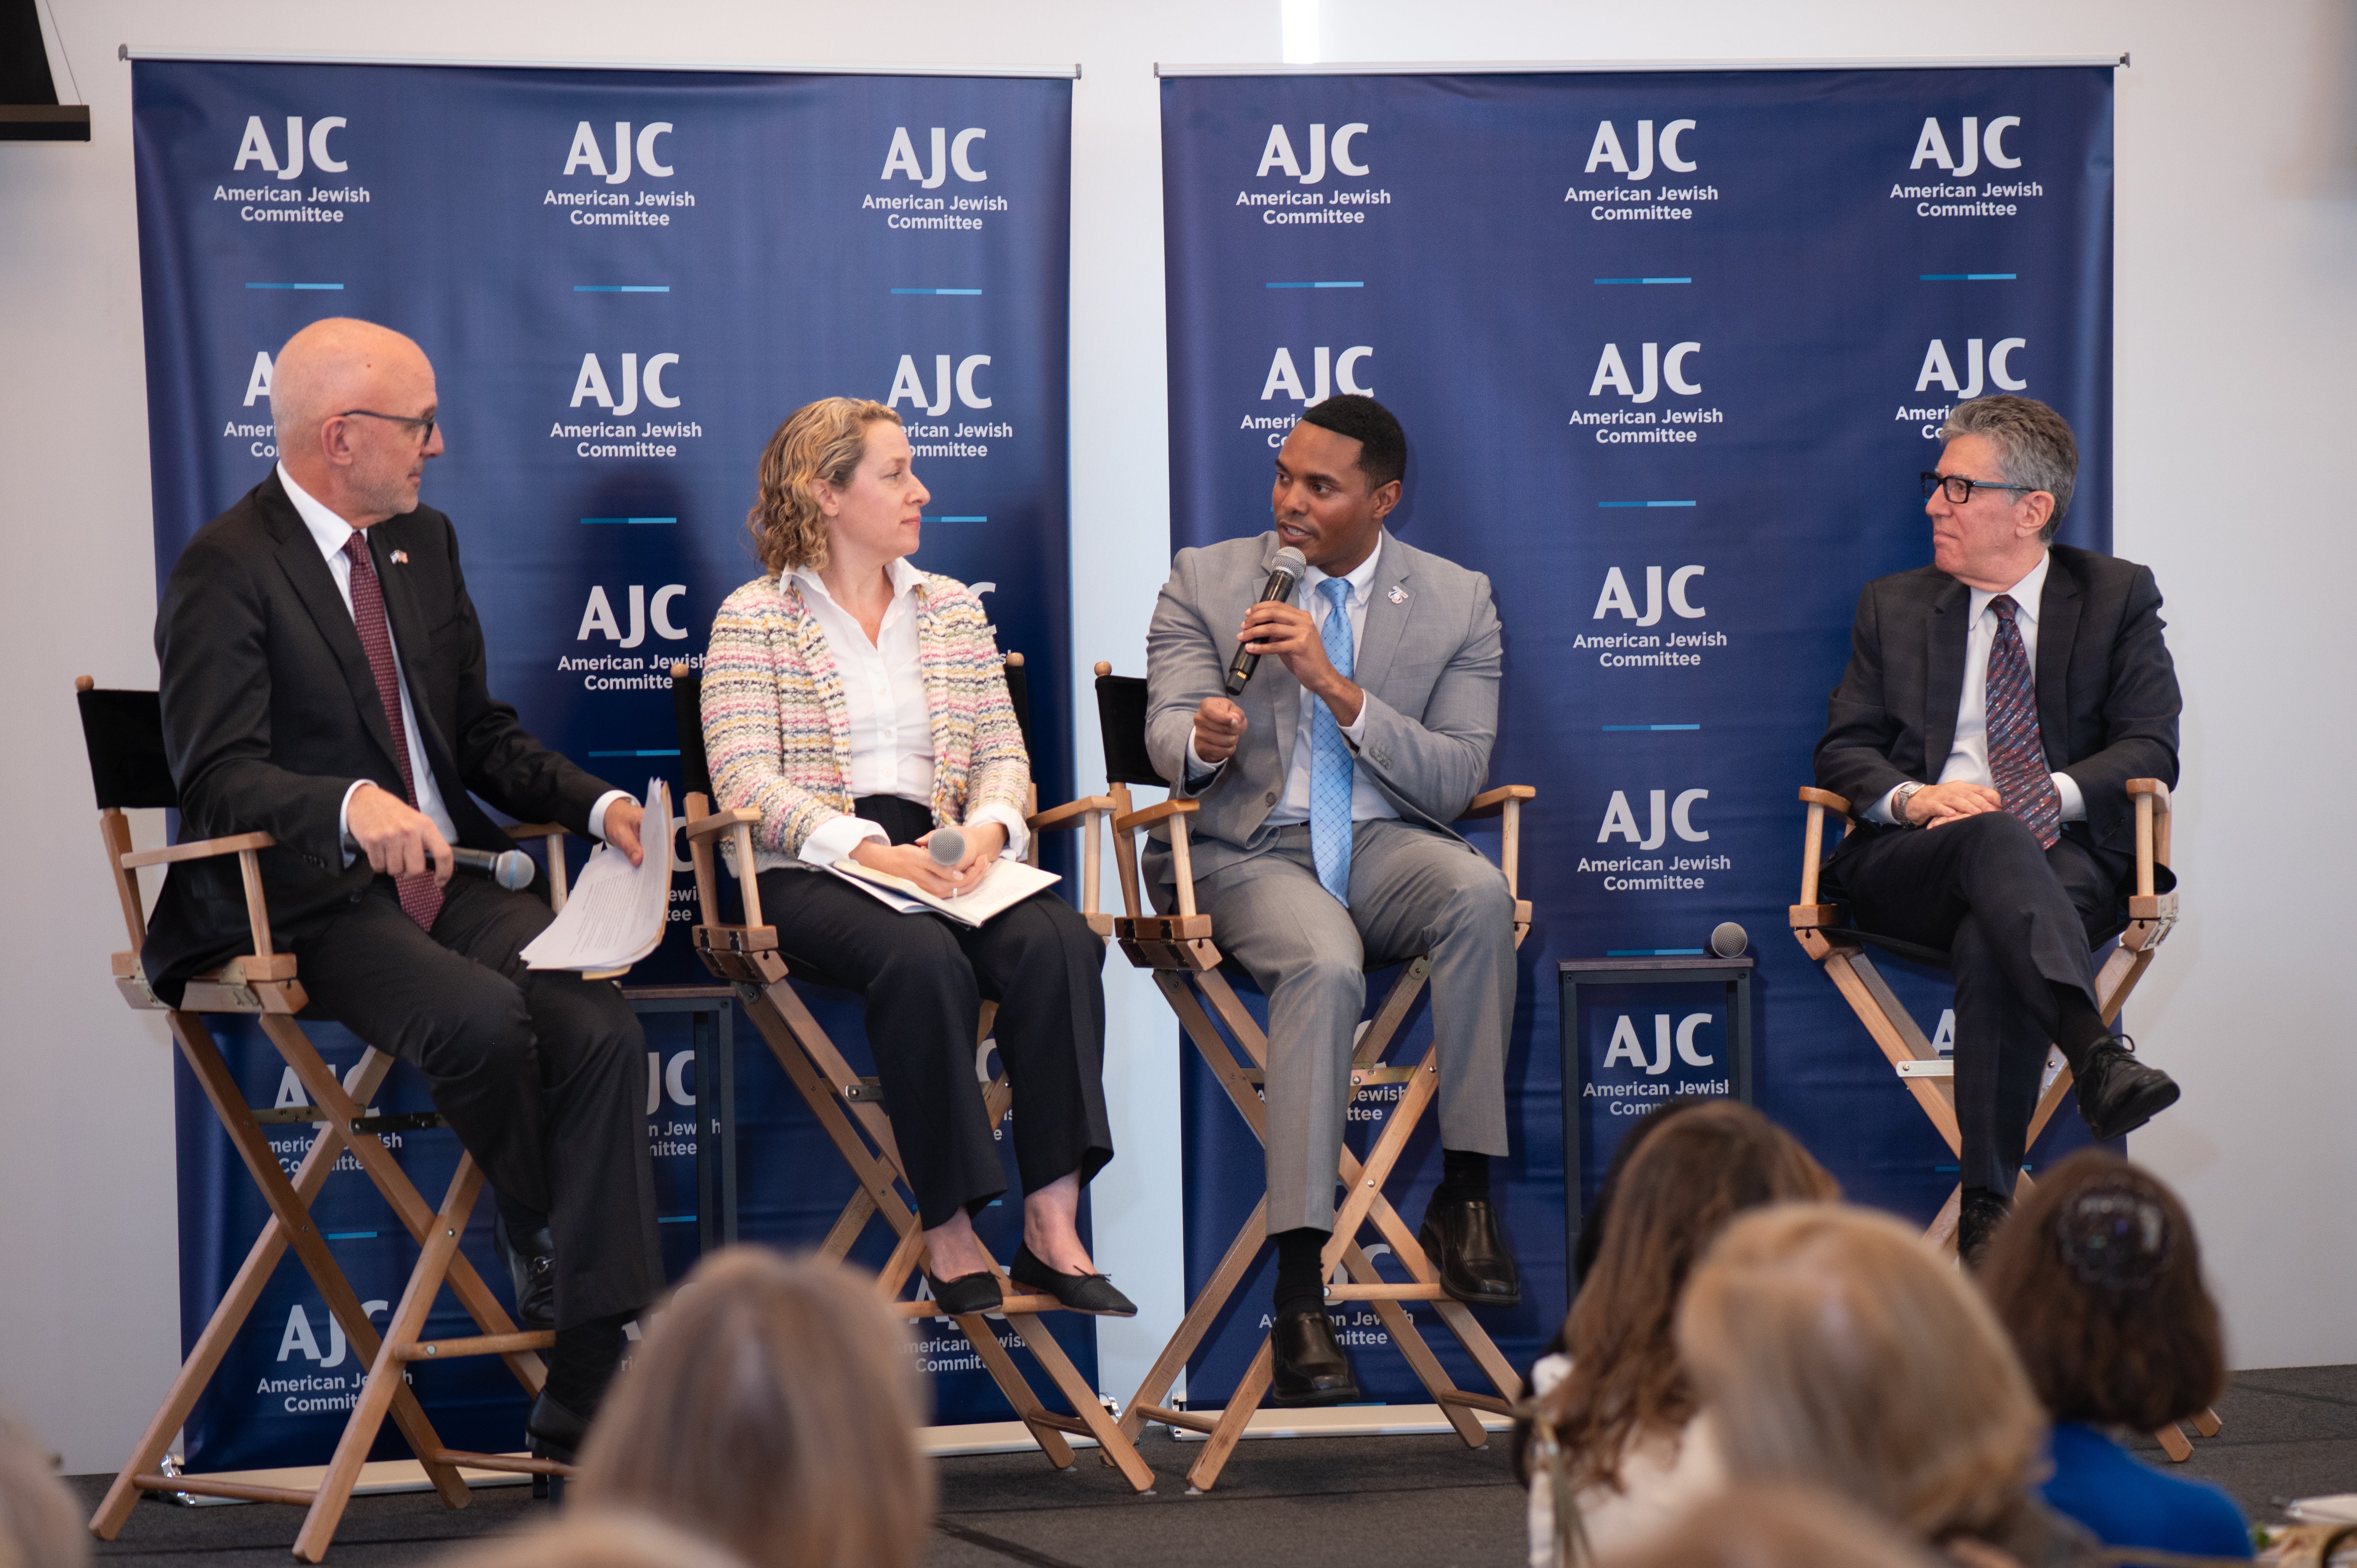 Panel featuring Ted Deutch, AJC CEO, Edward and Sandra Meyer Office of the CEO, Dr. Sara Coodin, AJC Director of Academic Affairs, Congressman Ritchie Torres, U.S. House of Representatives, and Rabbi Ammiel Hirsch, Stephen Wise Free Synagogue